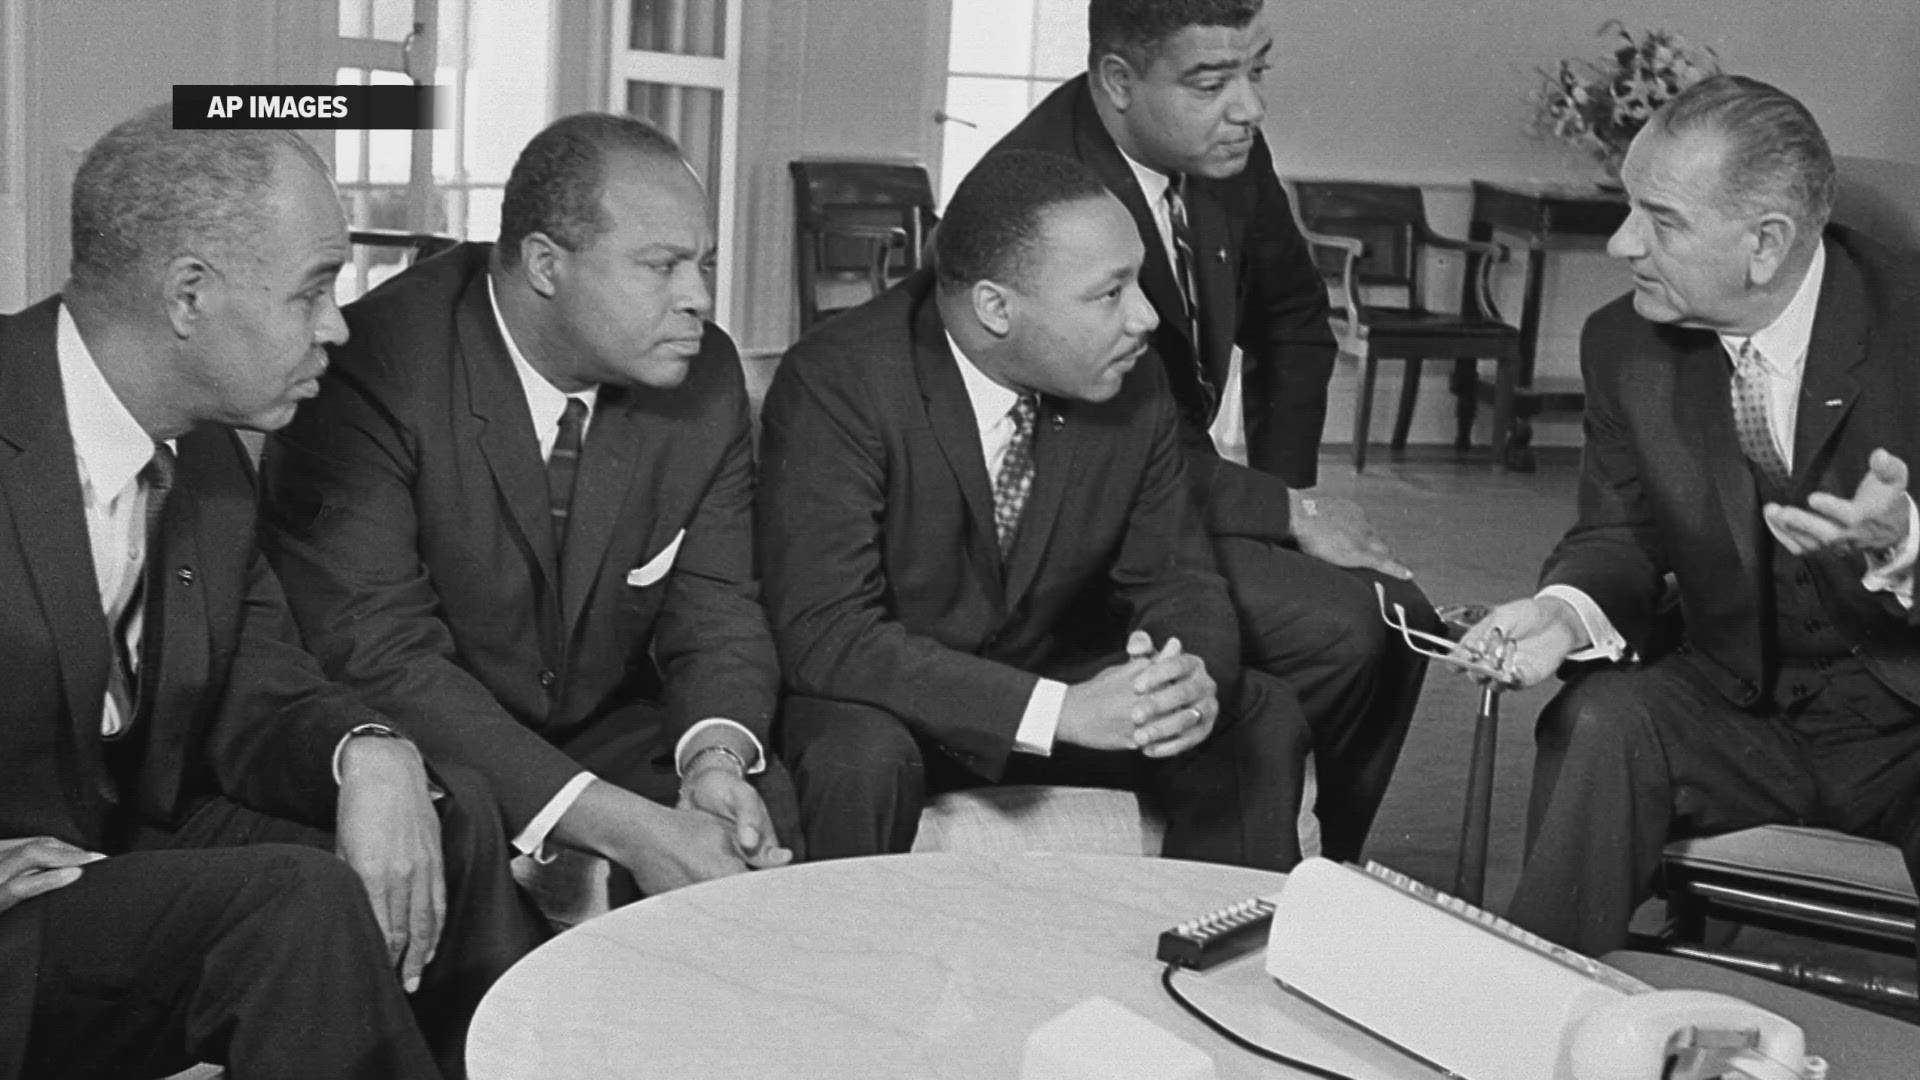 Here are some ways you can honor those following MLK Jr.'s legacy.